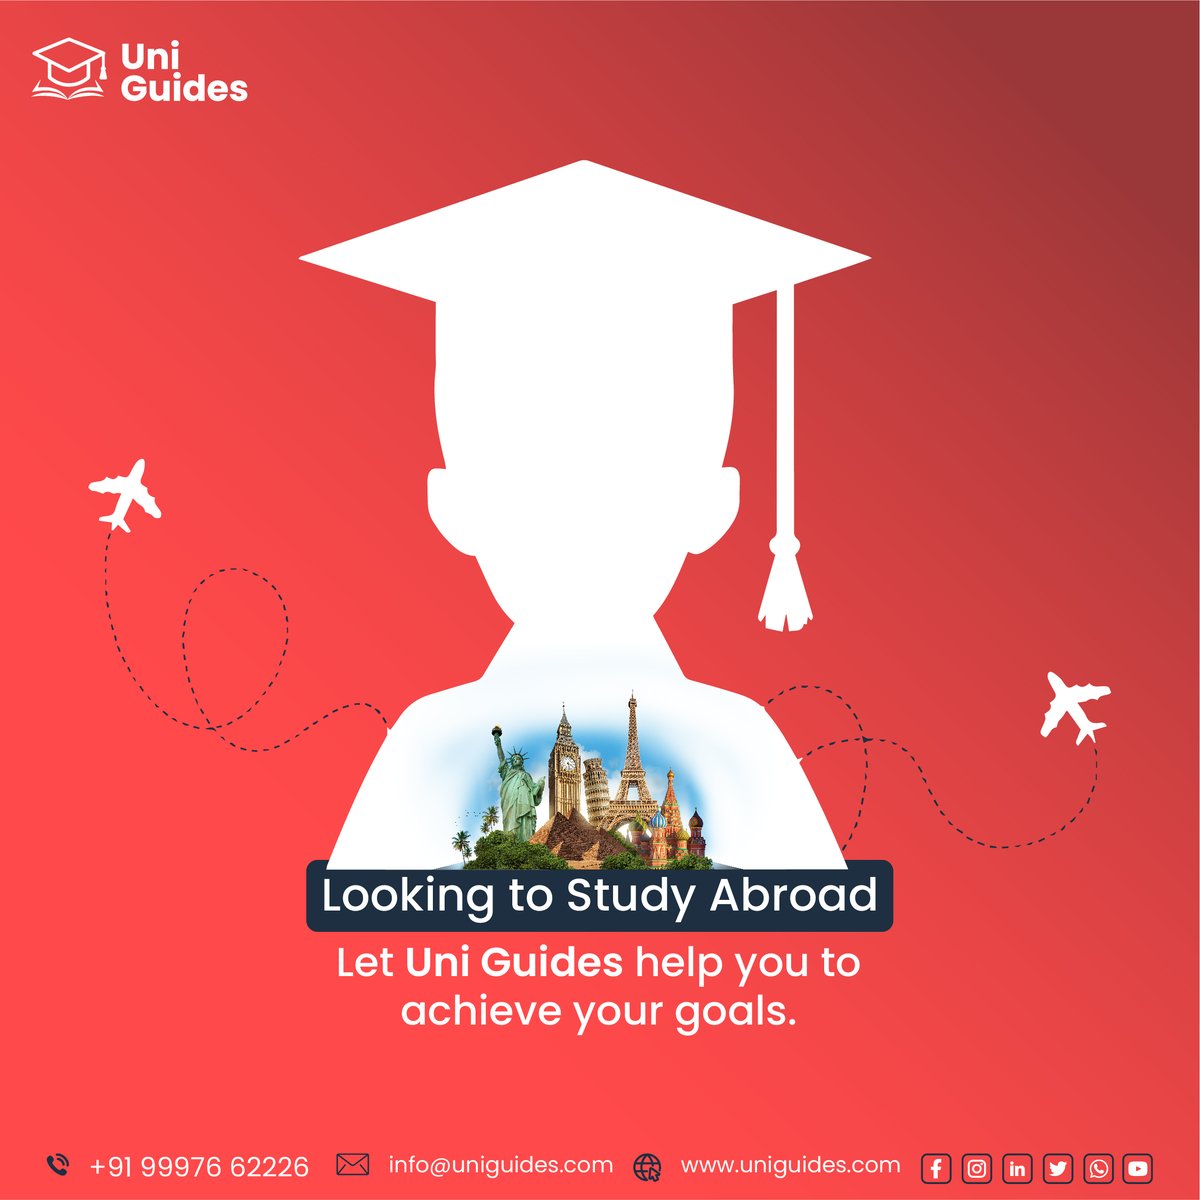 Looking to Study Abroad? 🎓
Let Uni Guides be your trusted partner in achieving your goals! With our expertise and personalized guidance, we'll help you navigate the exciting world of international education. 

📞 Call now: +91 99976 62226
#StudyAbroad #EducationConsultancy